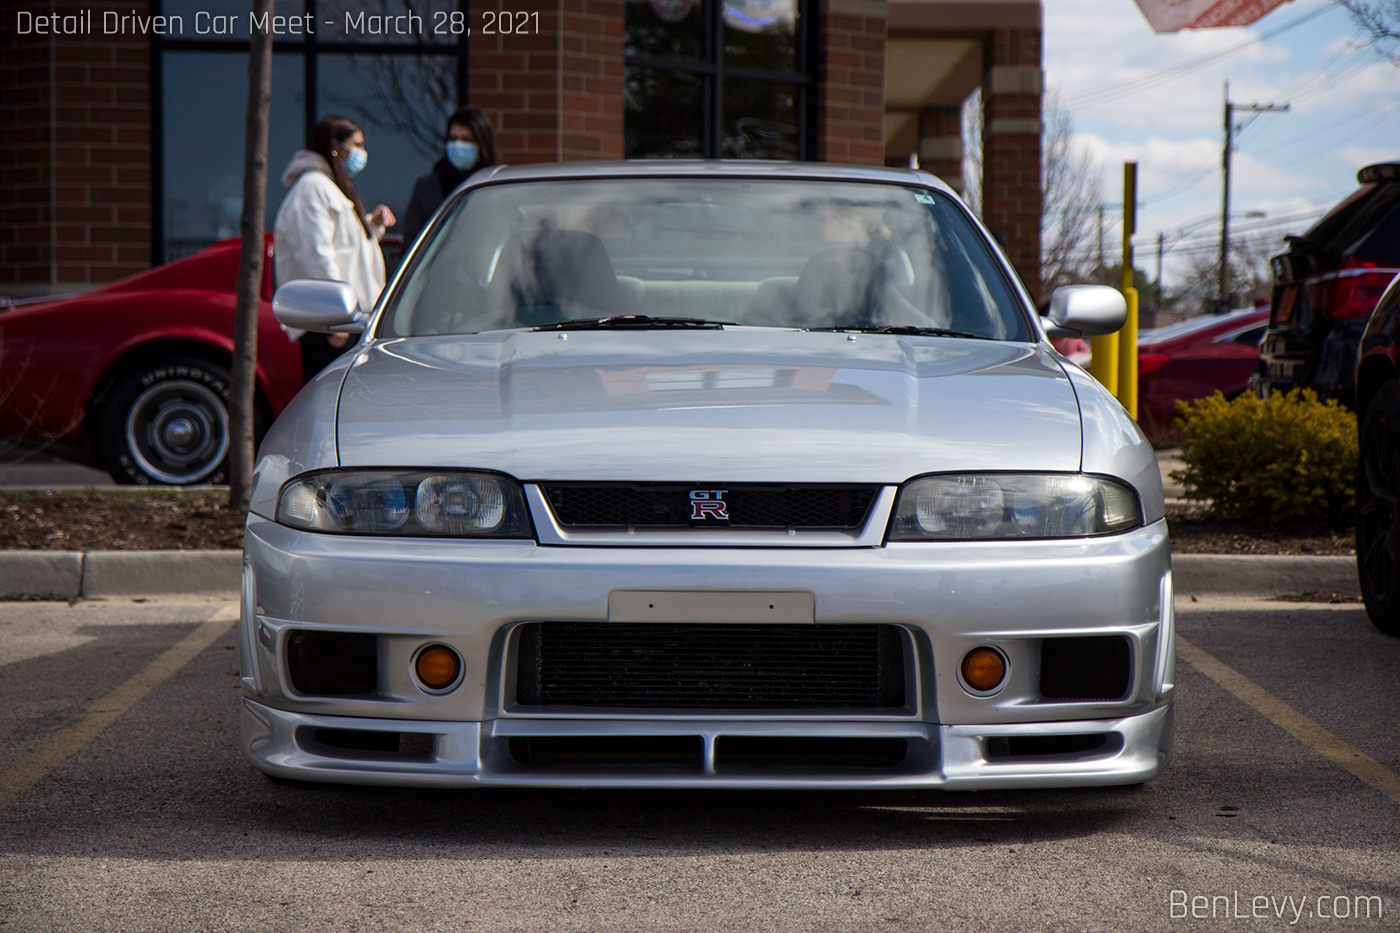 Front End of a Silver R33 Nissan Skyline GT-R